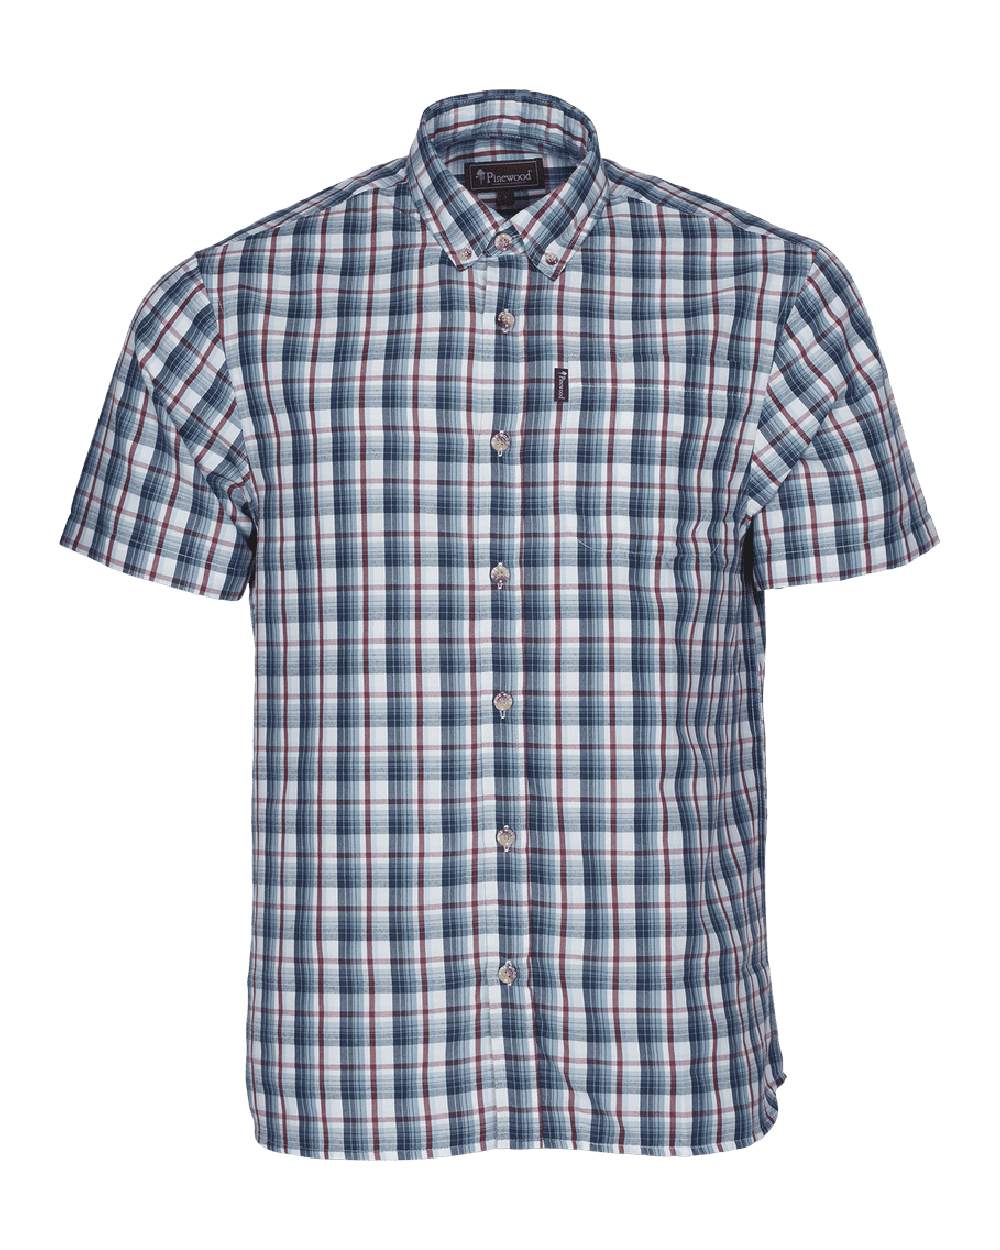 Pinewood Mens Summer Shirt in Blue/Red